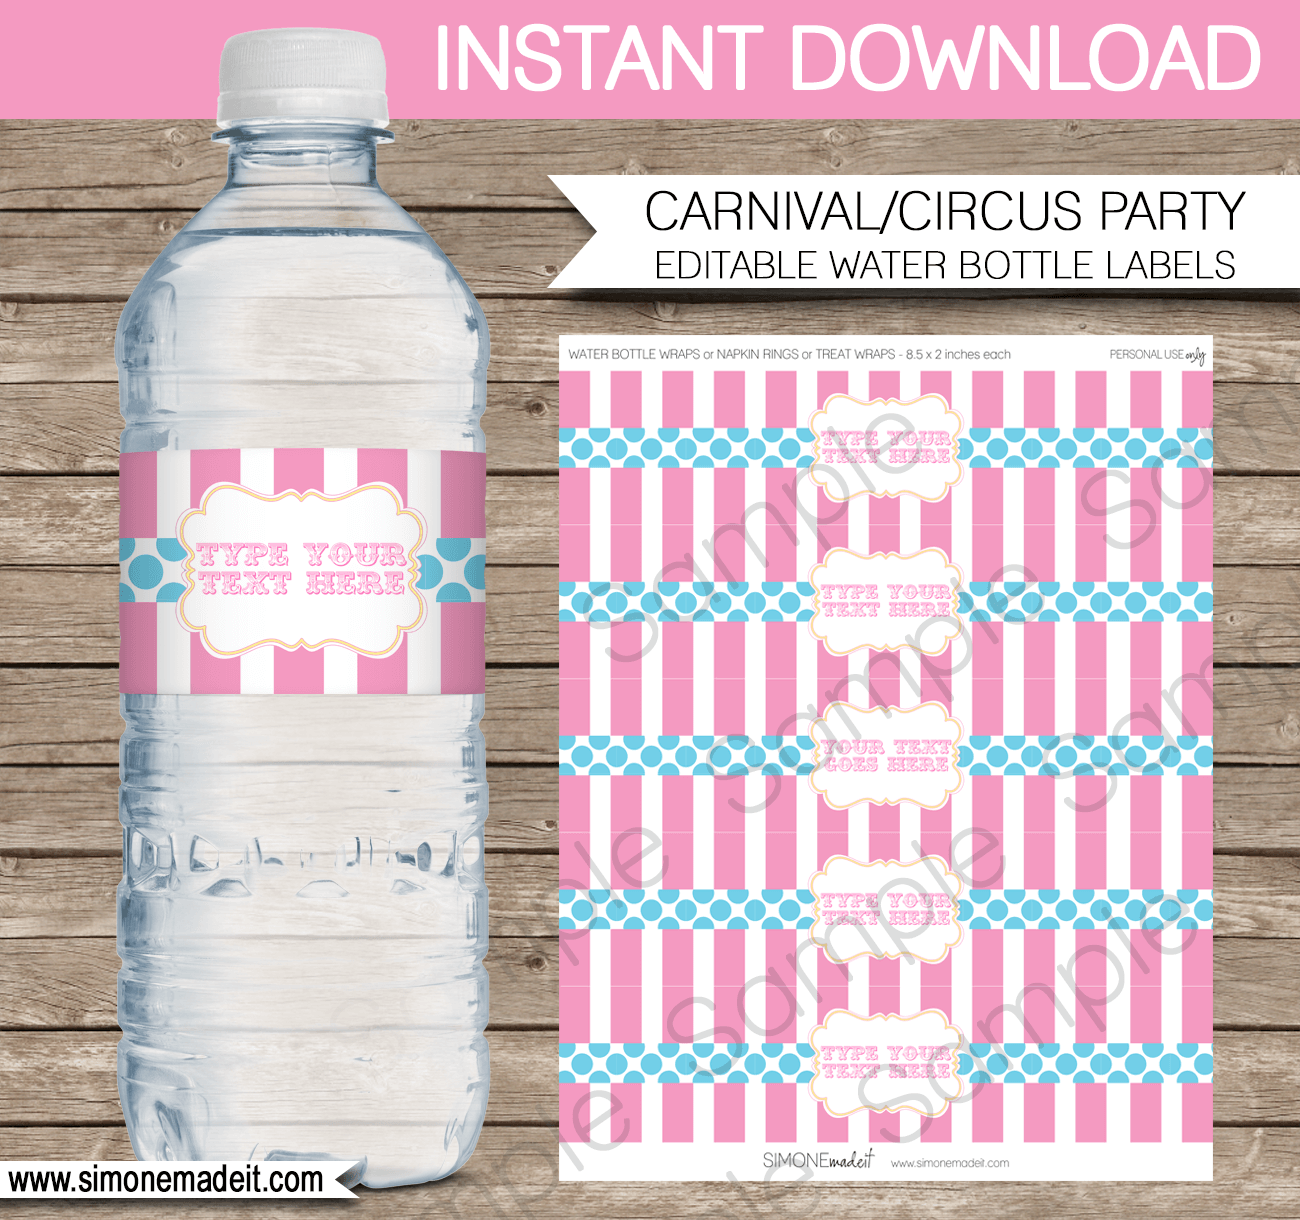 Editable Carnival Water Bottle Labels | Pink Aqua Carnival Party | Circus Birthday Party | Printable Decorations | DIY Template | $3.00 INSTANT DOWNLOAD via SIMONEmadeit.com